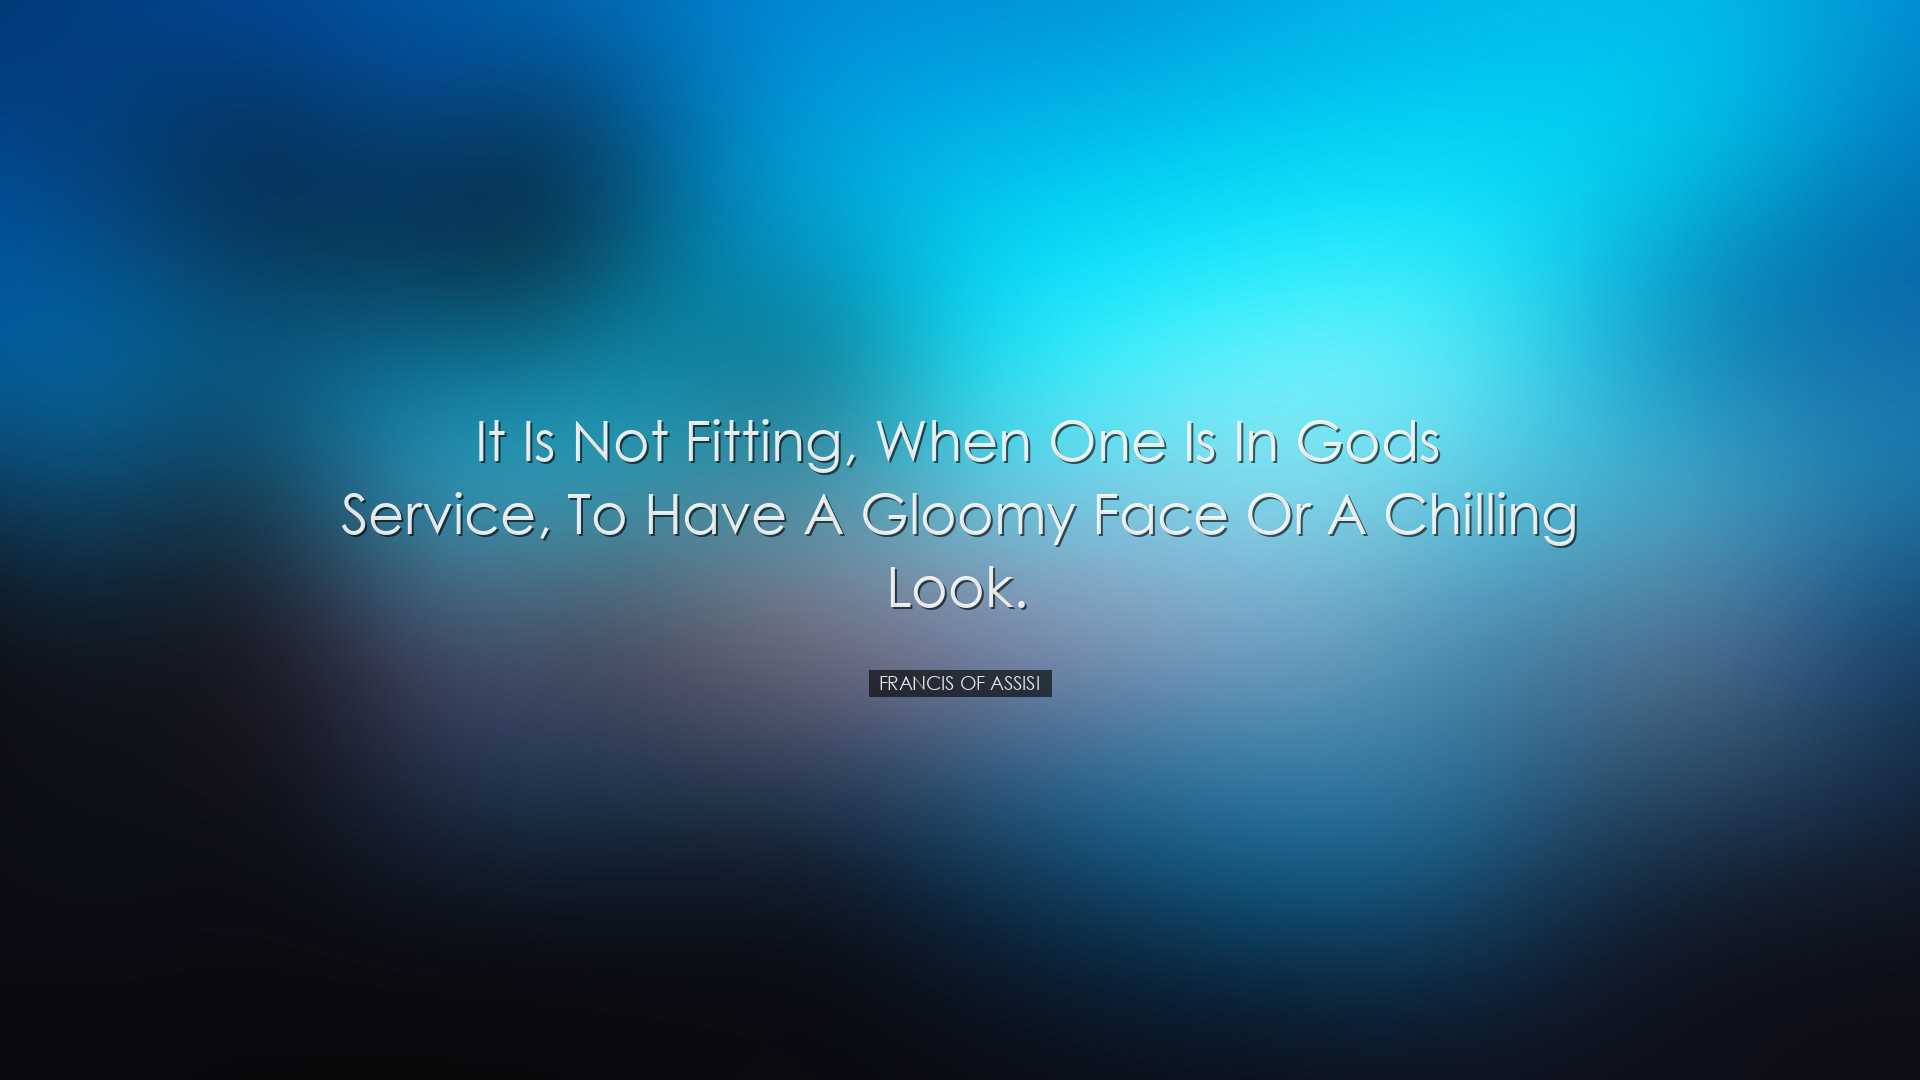 It is not fitting, when one is in Gods service, to have a gloomy f